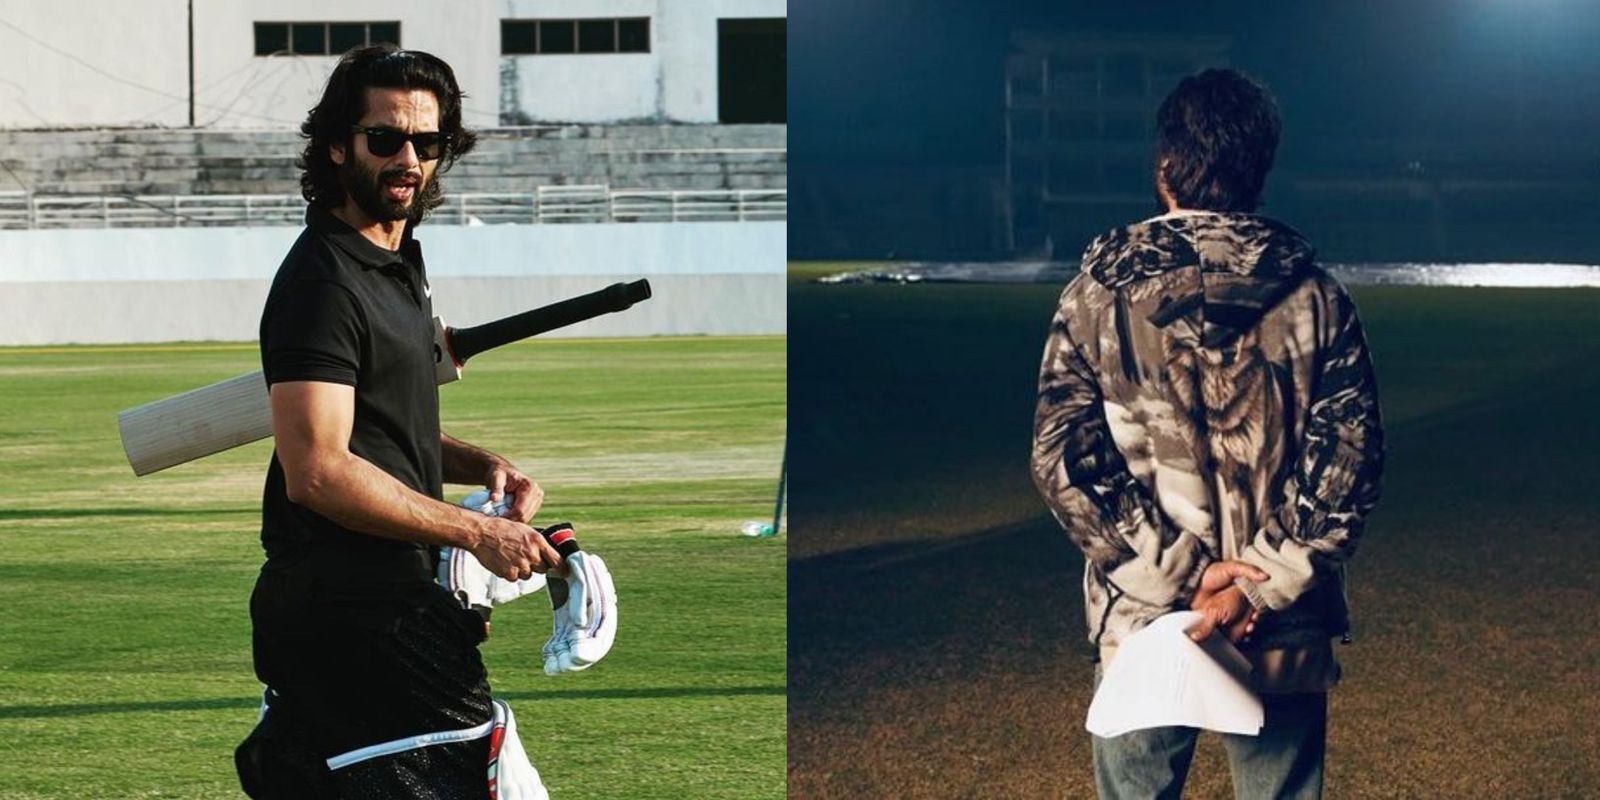 Shahid Kapoor Shares A Heartwarming Post As He Wraps Jersey; Calls It His ‘Best Filmmaking Experience Yet’